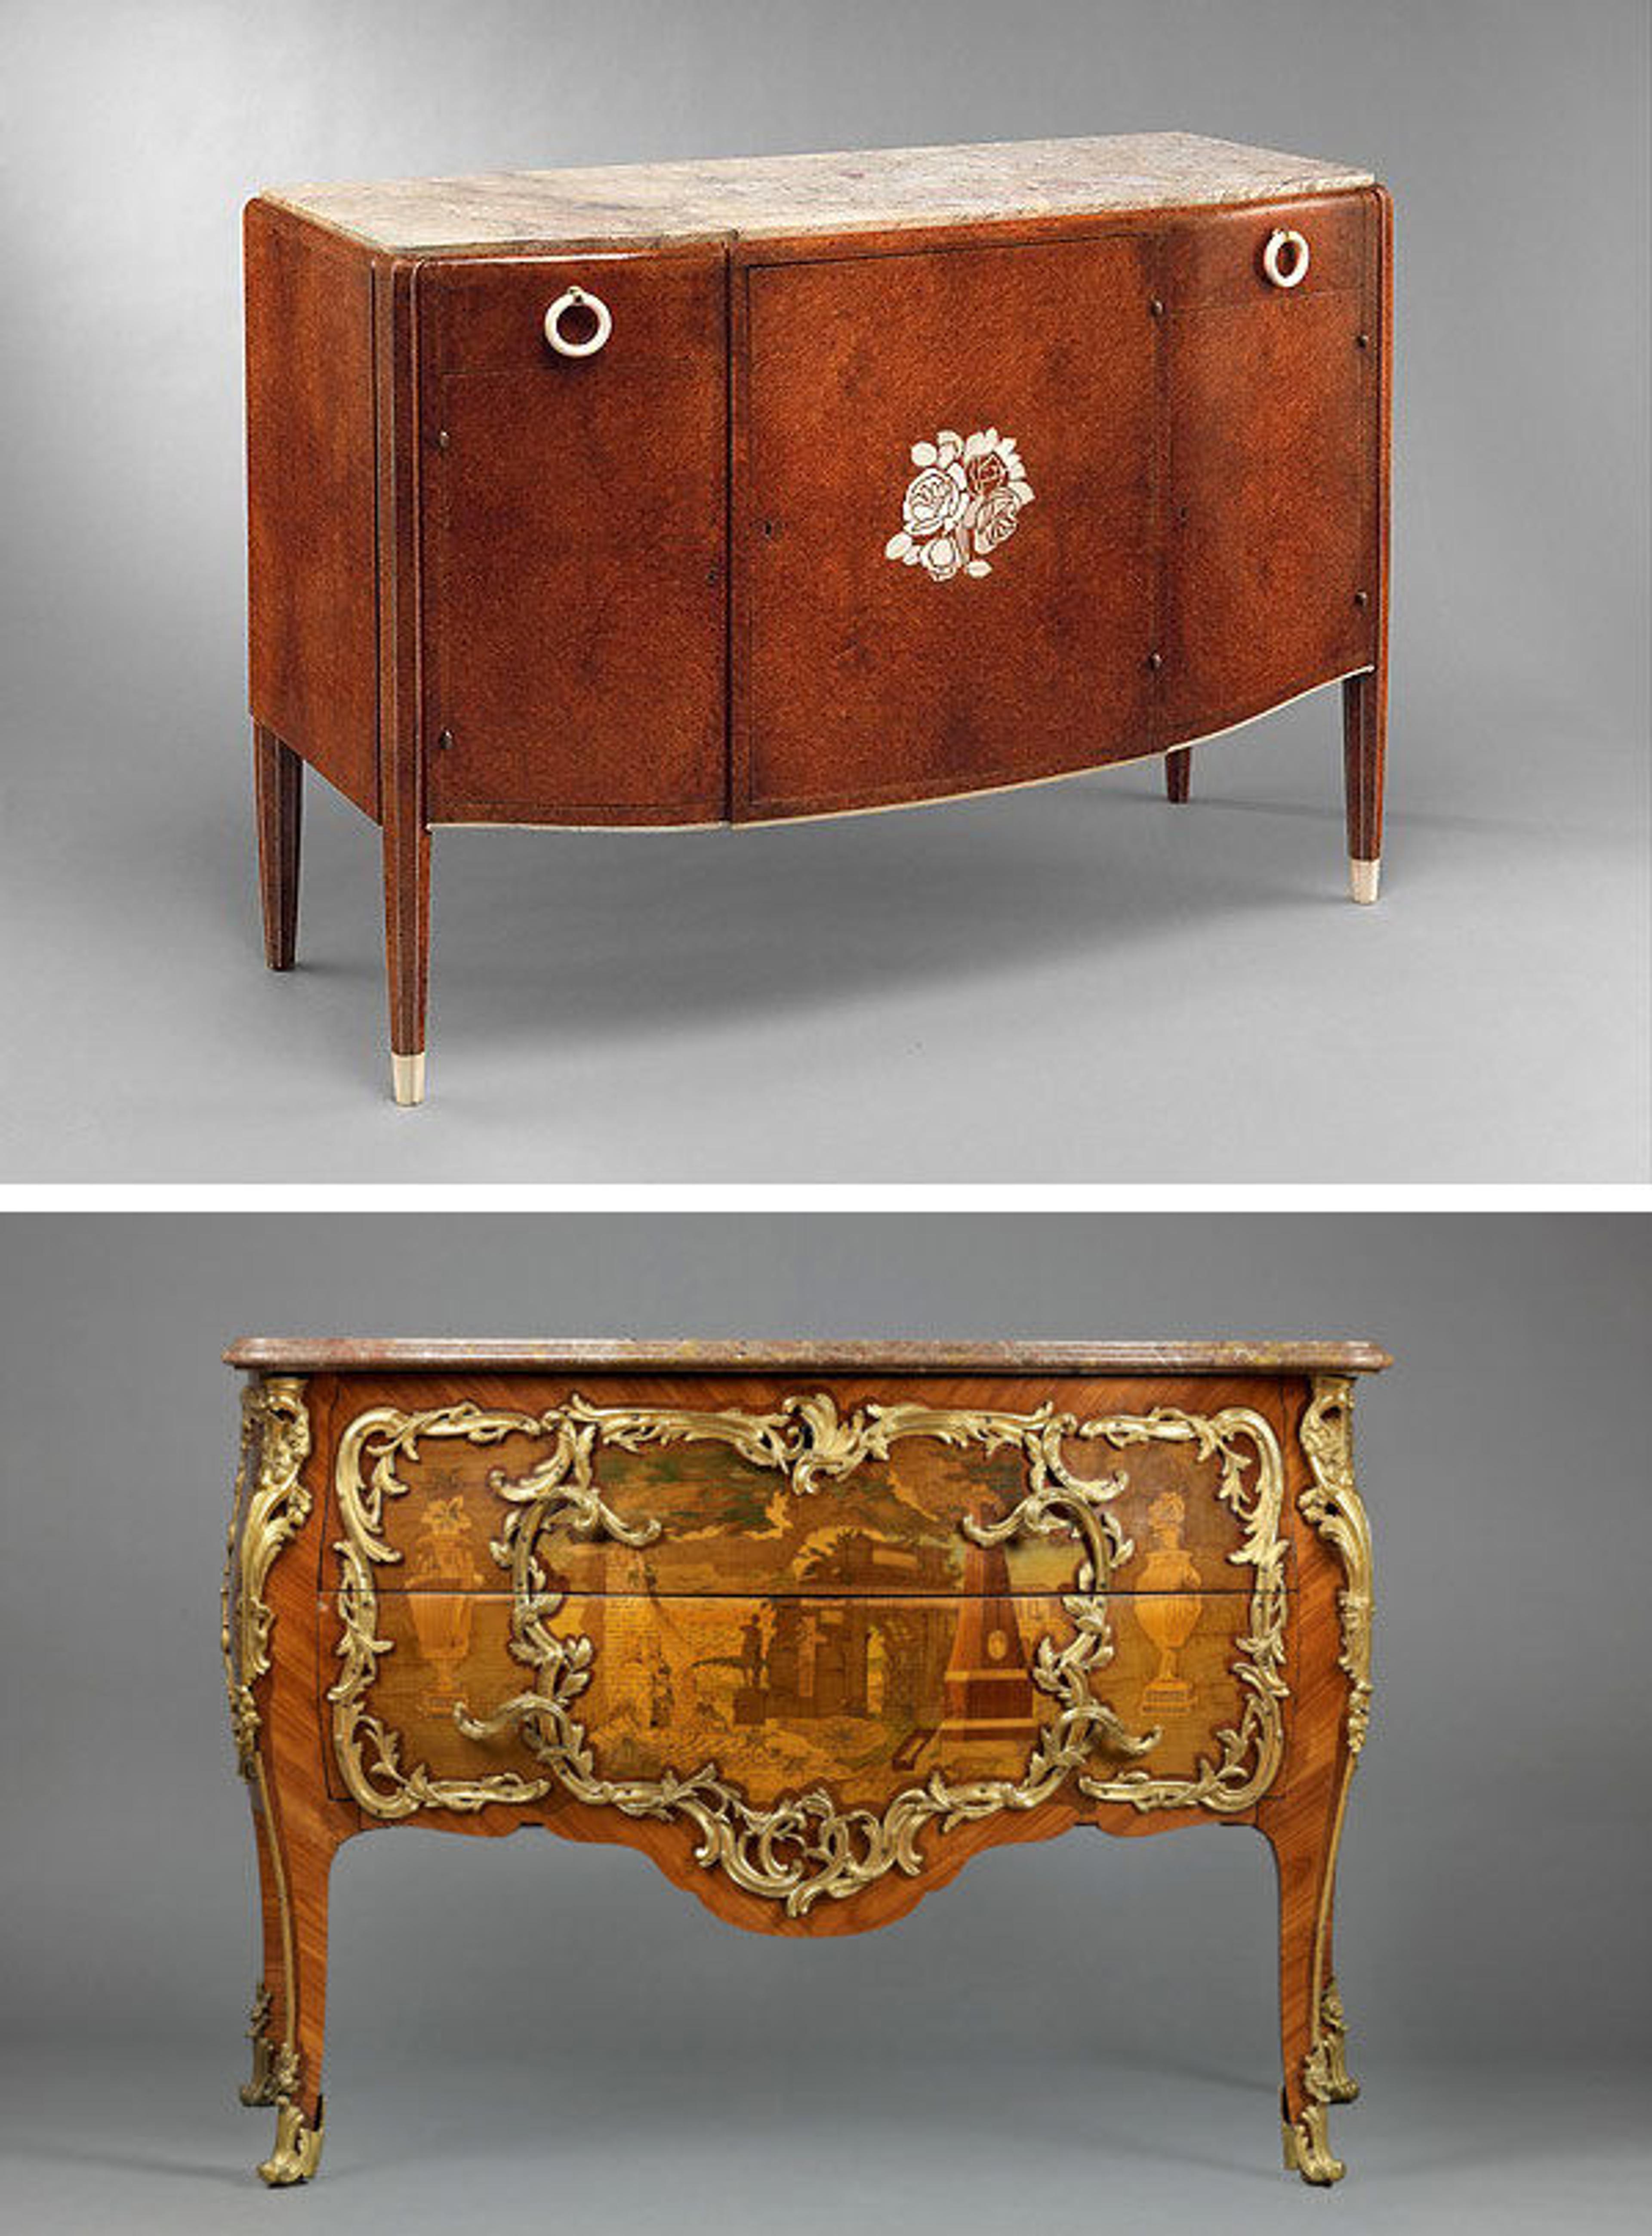 French Art Deco aimed to continue the tradition of craftsmanship during the ancien régime. Compare and contrast the following objects: the object on top is French Art Deco, and the bottom piece was created during the ancien régime. Left: Jules Leleu (French, 1883–1961). Commode, 1925. Amboyna wood, ivory, marble, brass; H. 35, L. 49 1/4, D. 18 1/2 in. The Metropolitan Museum of Art, New York, Gift of Agnes Miles Carpenter, 1946 (46.93). Right: Attributed to Léonard Boudin (French, 1735–1807) and Pierre-Antoine Foullet (French, 1746–1809). Commode, ca. 1765–70. Oak and pine veneered with stained maple, tulipwood, amaranth, and holly stringing, with marquetry of stained, shaded, and engraved maple, mahogany, amaranth, barberry and other marquetry woods; gilt-bronze mounts; marble top; brass rollers; H. 87 cm, W. 128.3 cm, D. 62.2 cm. The Metropolitan Museum of Art, New York, Robert Lehman Collection, 1975 (1975.1.2033)